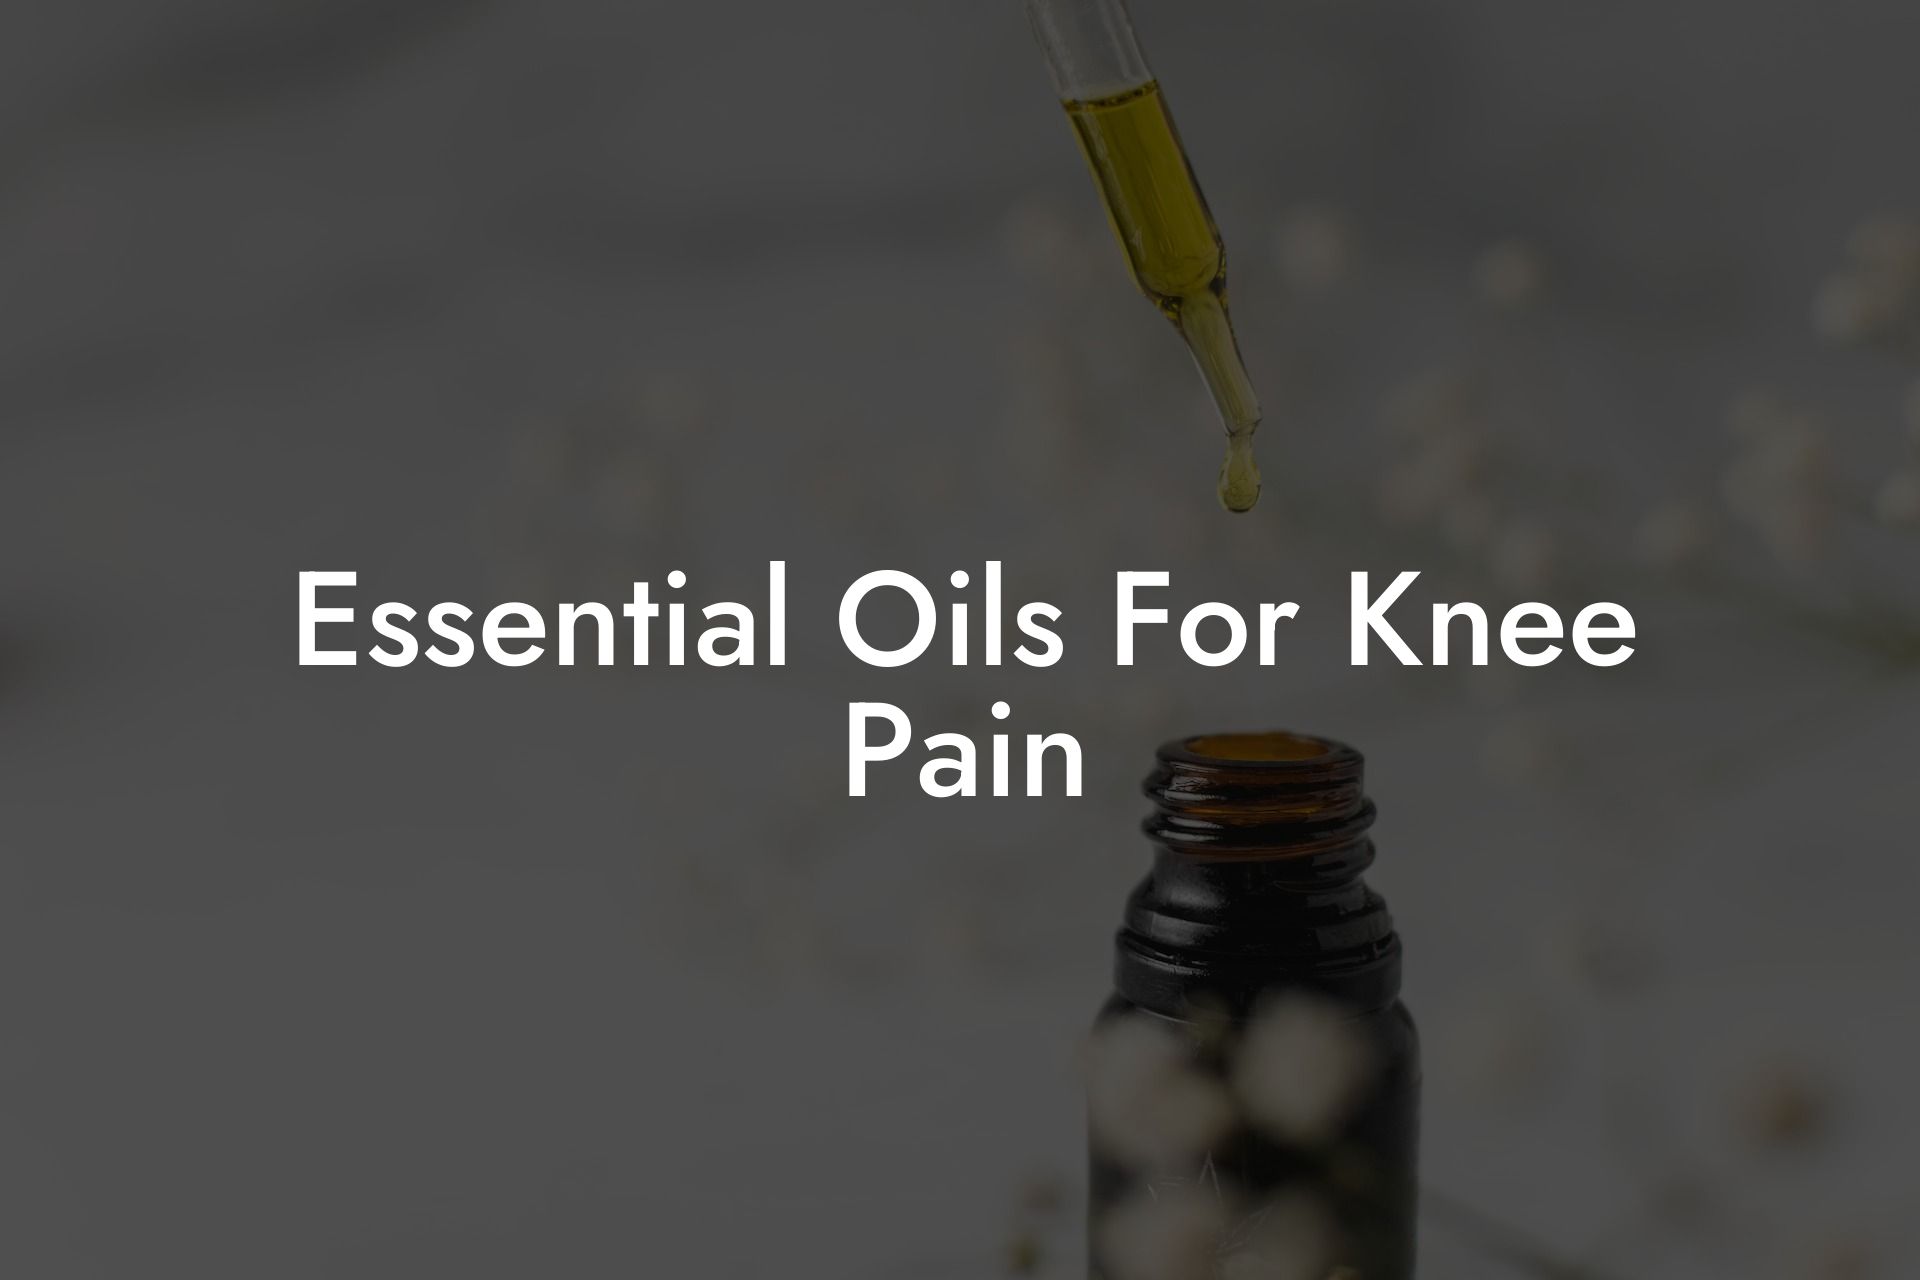 Essential Oils For Knee Pain